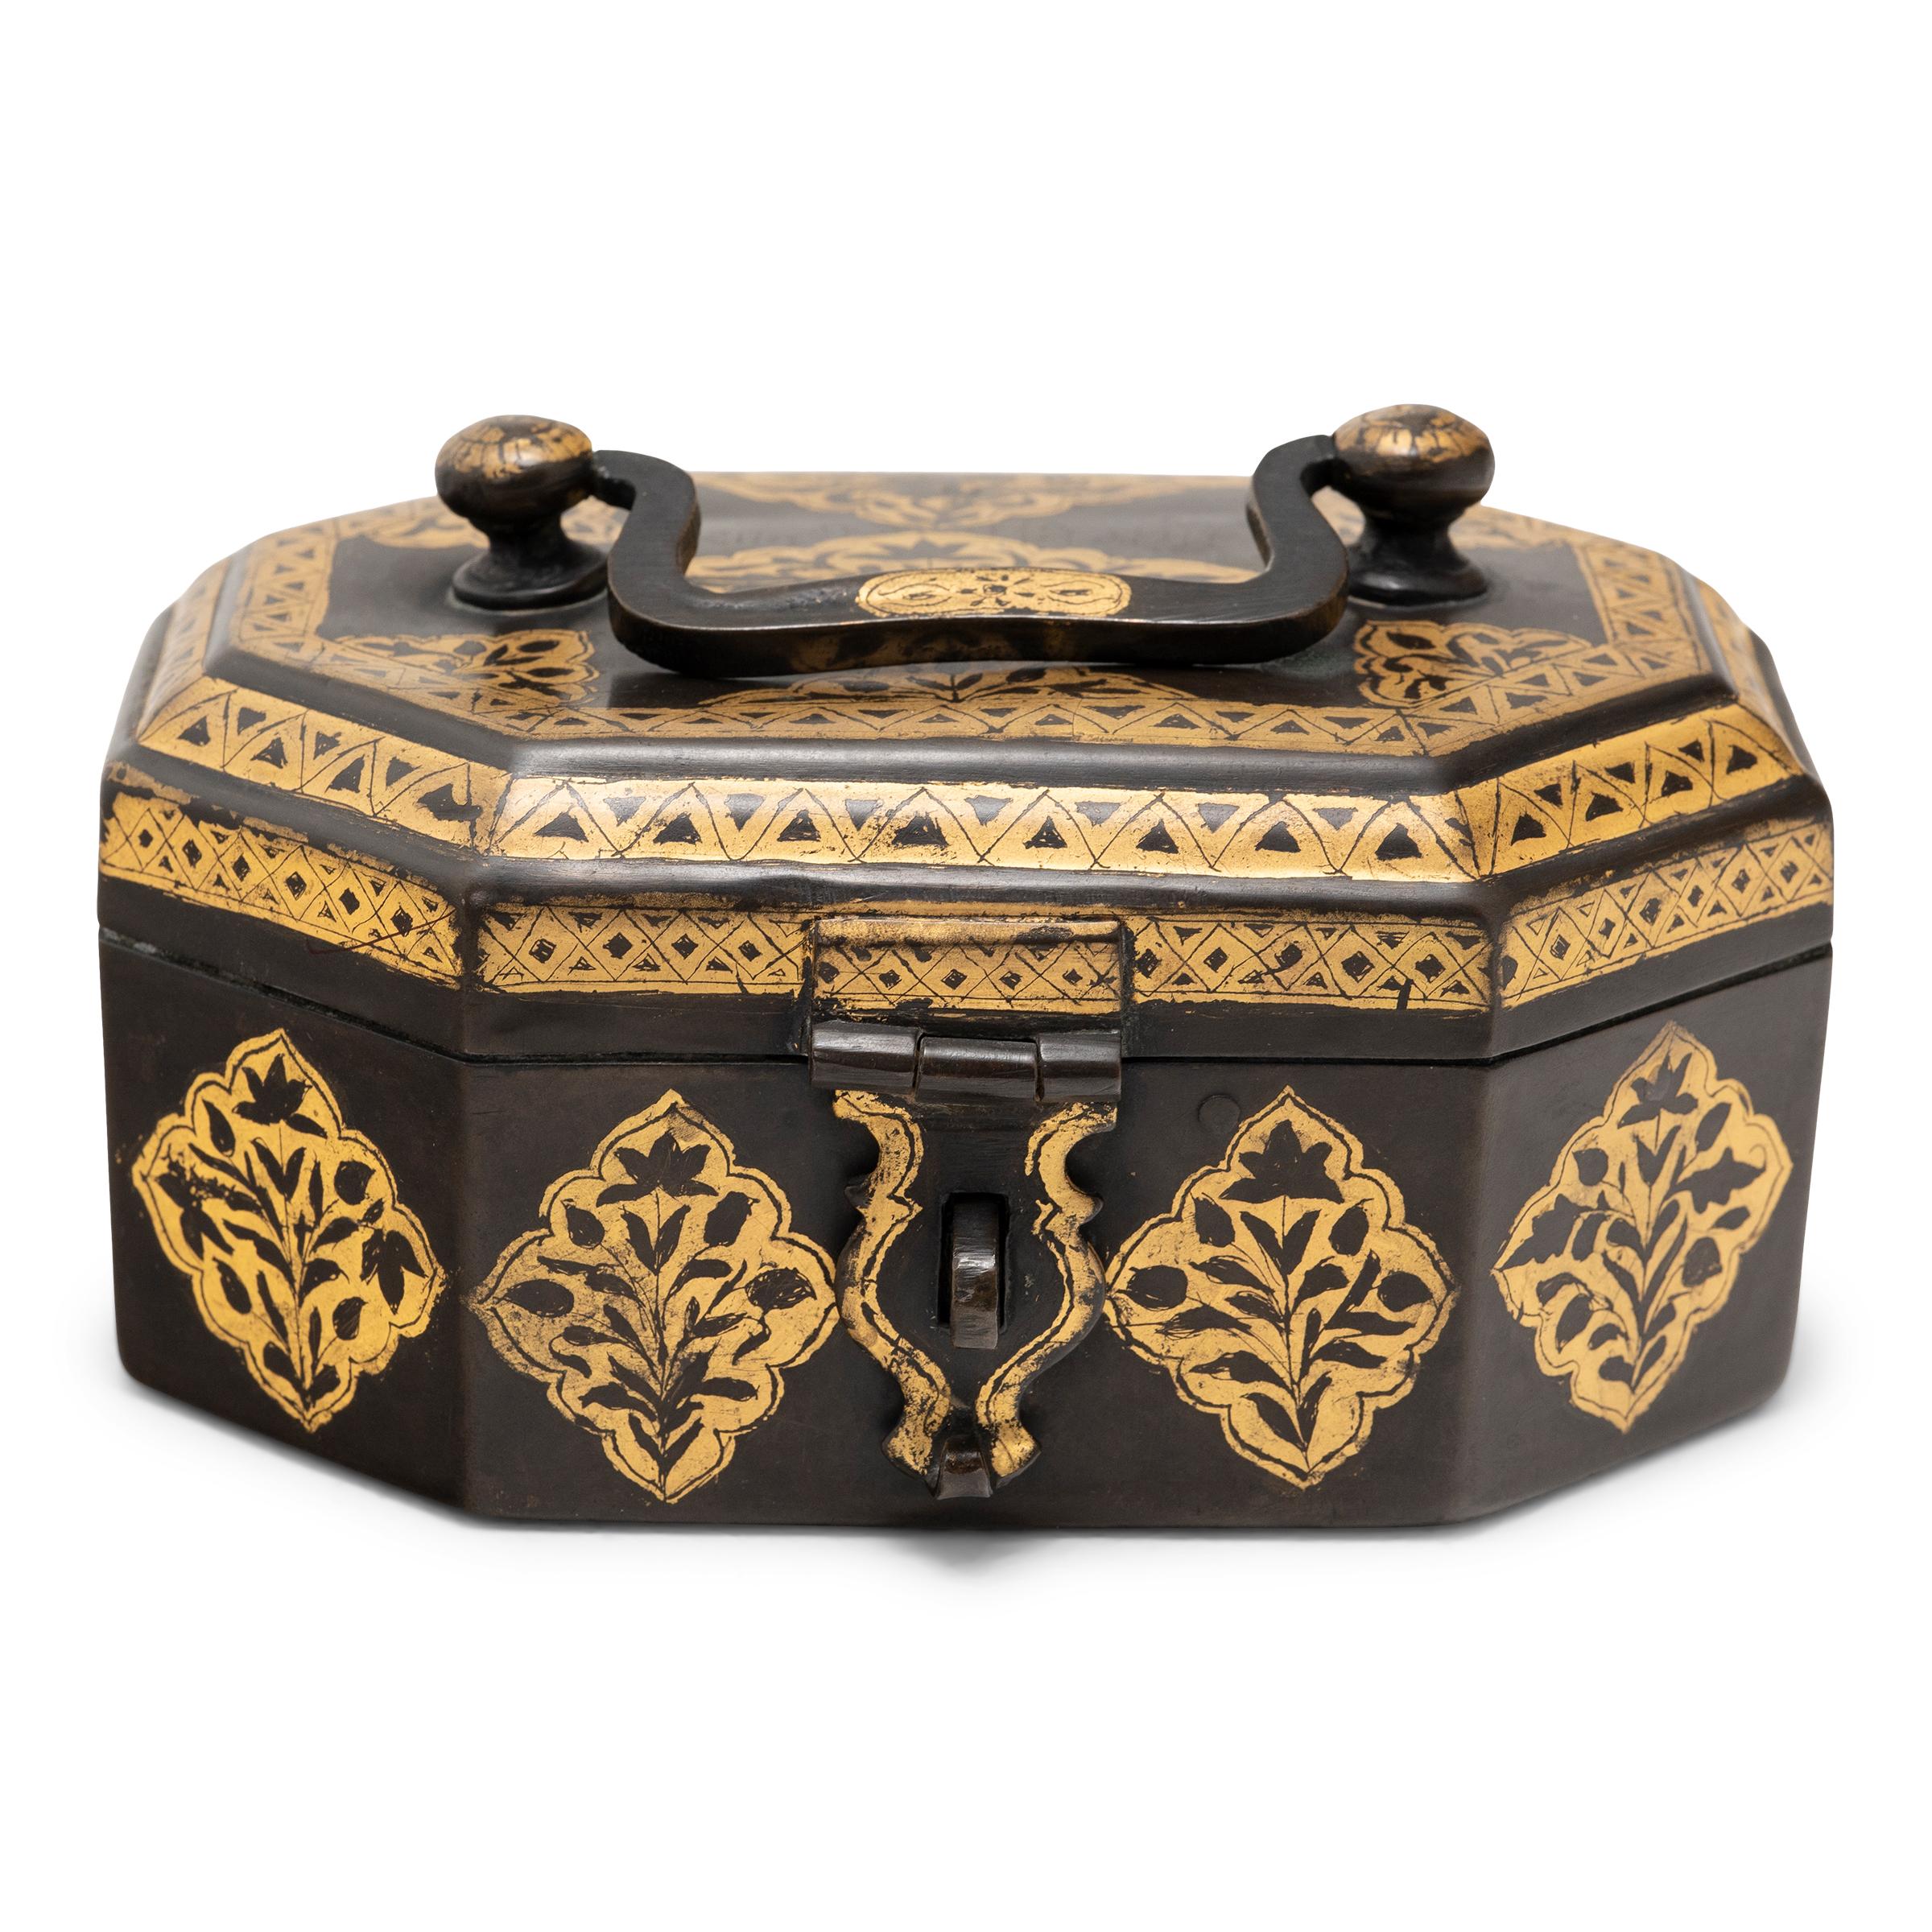 This ornate Indian betel nut box dates back to the early 20th century. Known in India as a paan daan, this box was used in the ritual of chewing betel nut or paan, a practice that dates back over four thousand years. Shared with others as a gesture